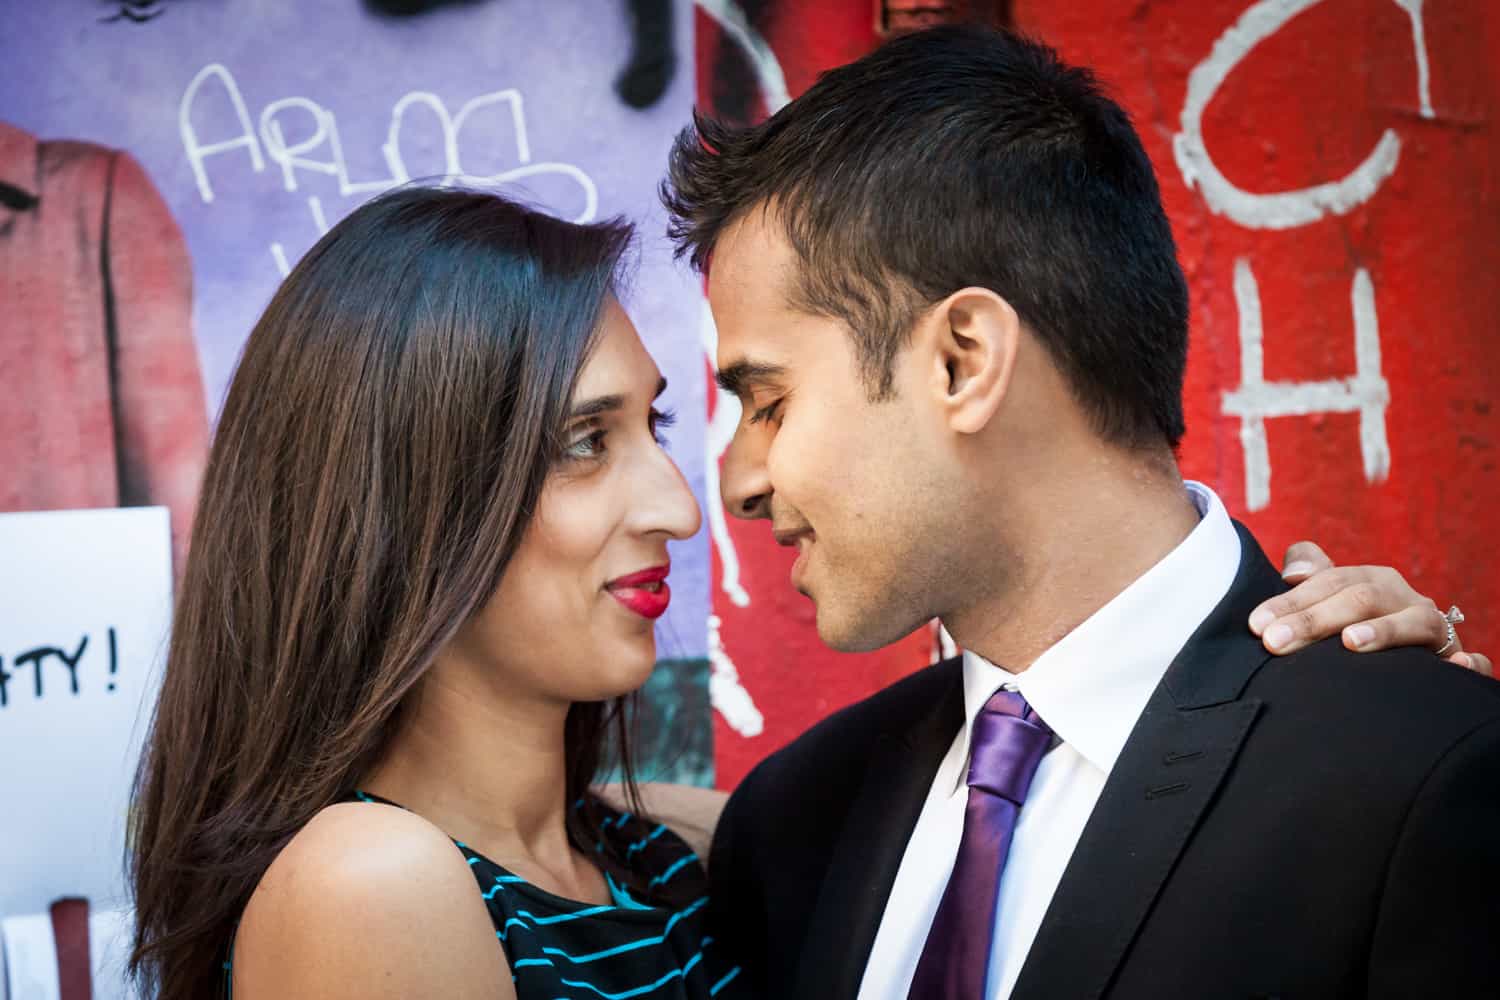 Couple in front of red graffiti wall in Tribeca